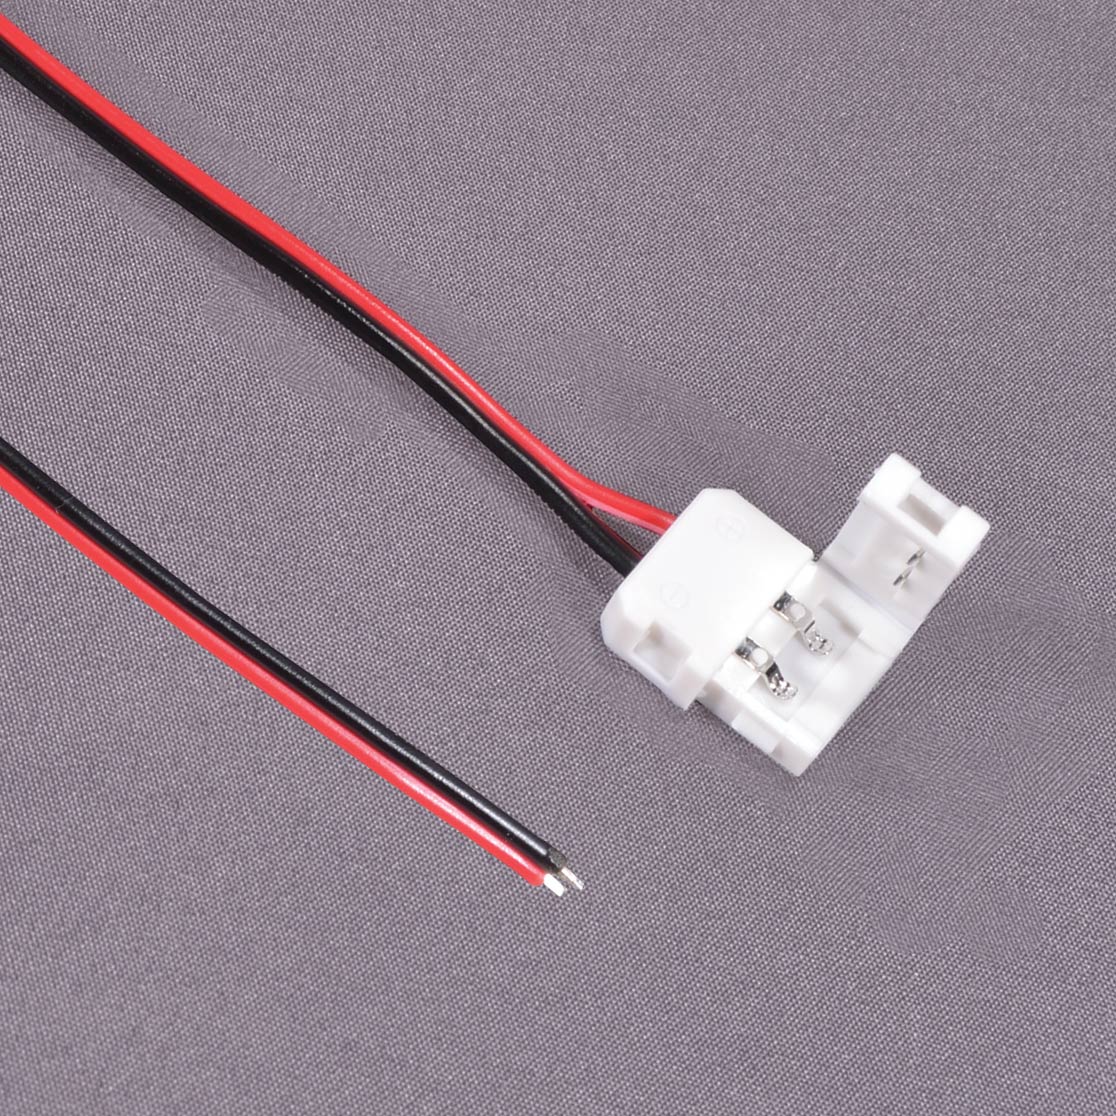 LED Strip Connector with 5 inch long flying leads - Micro - Mark Scenery